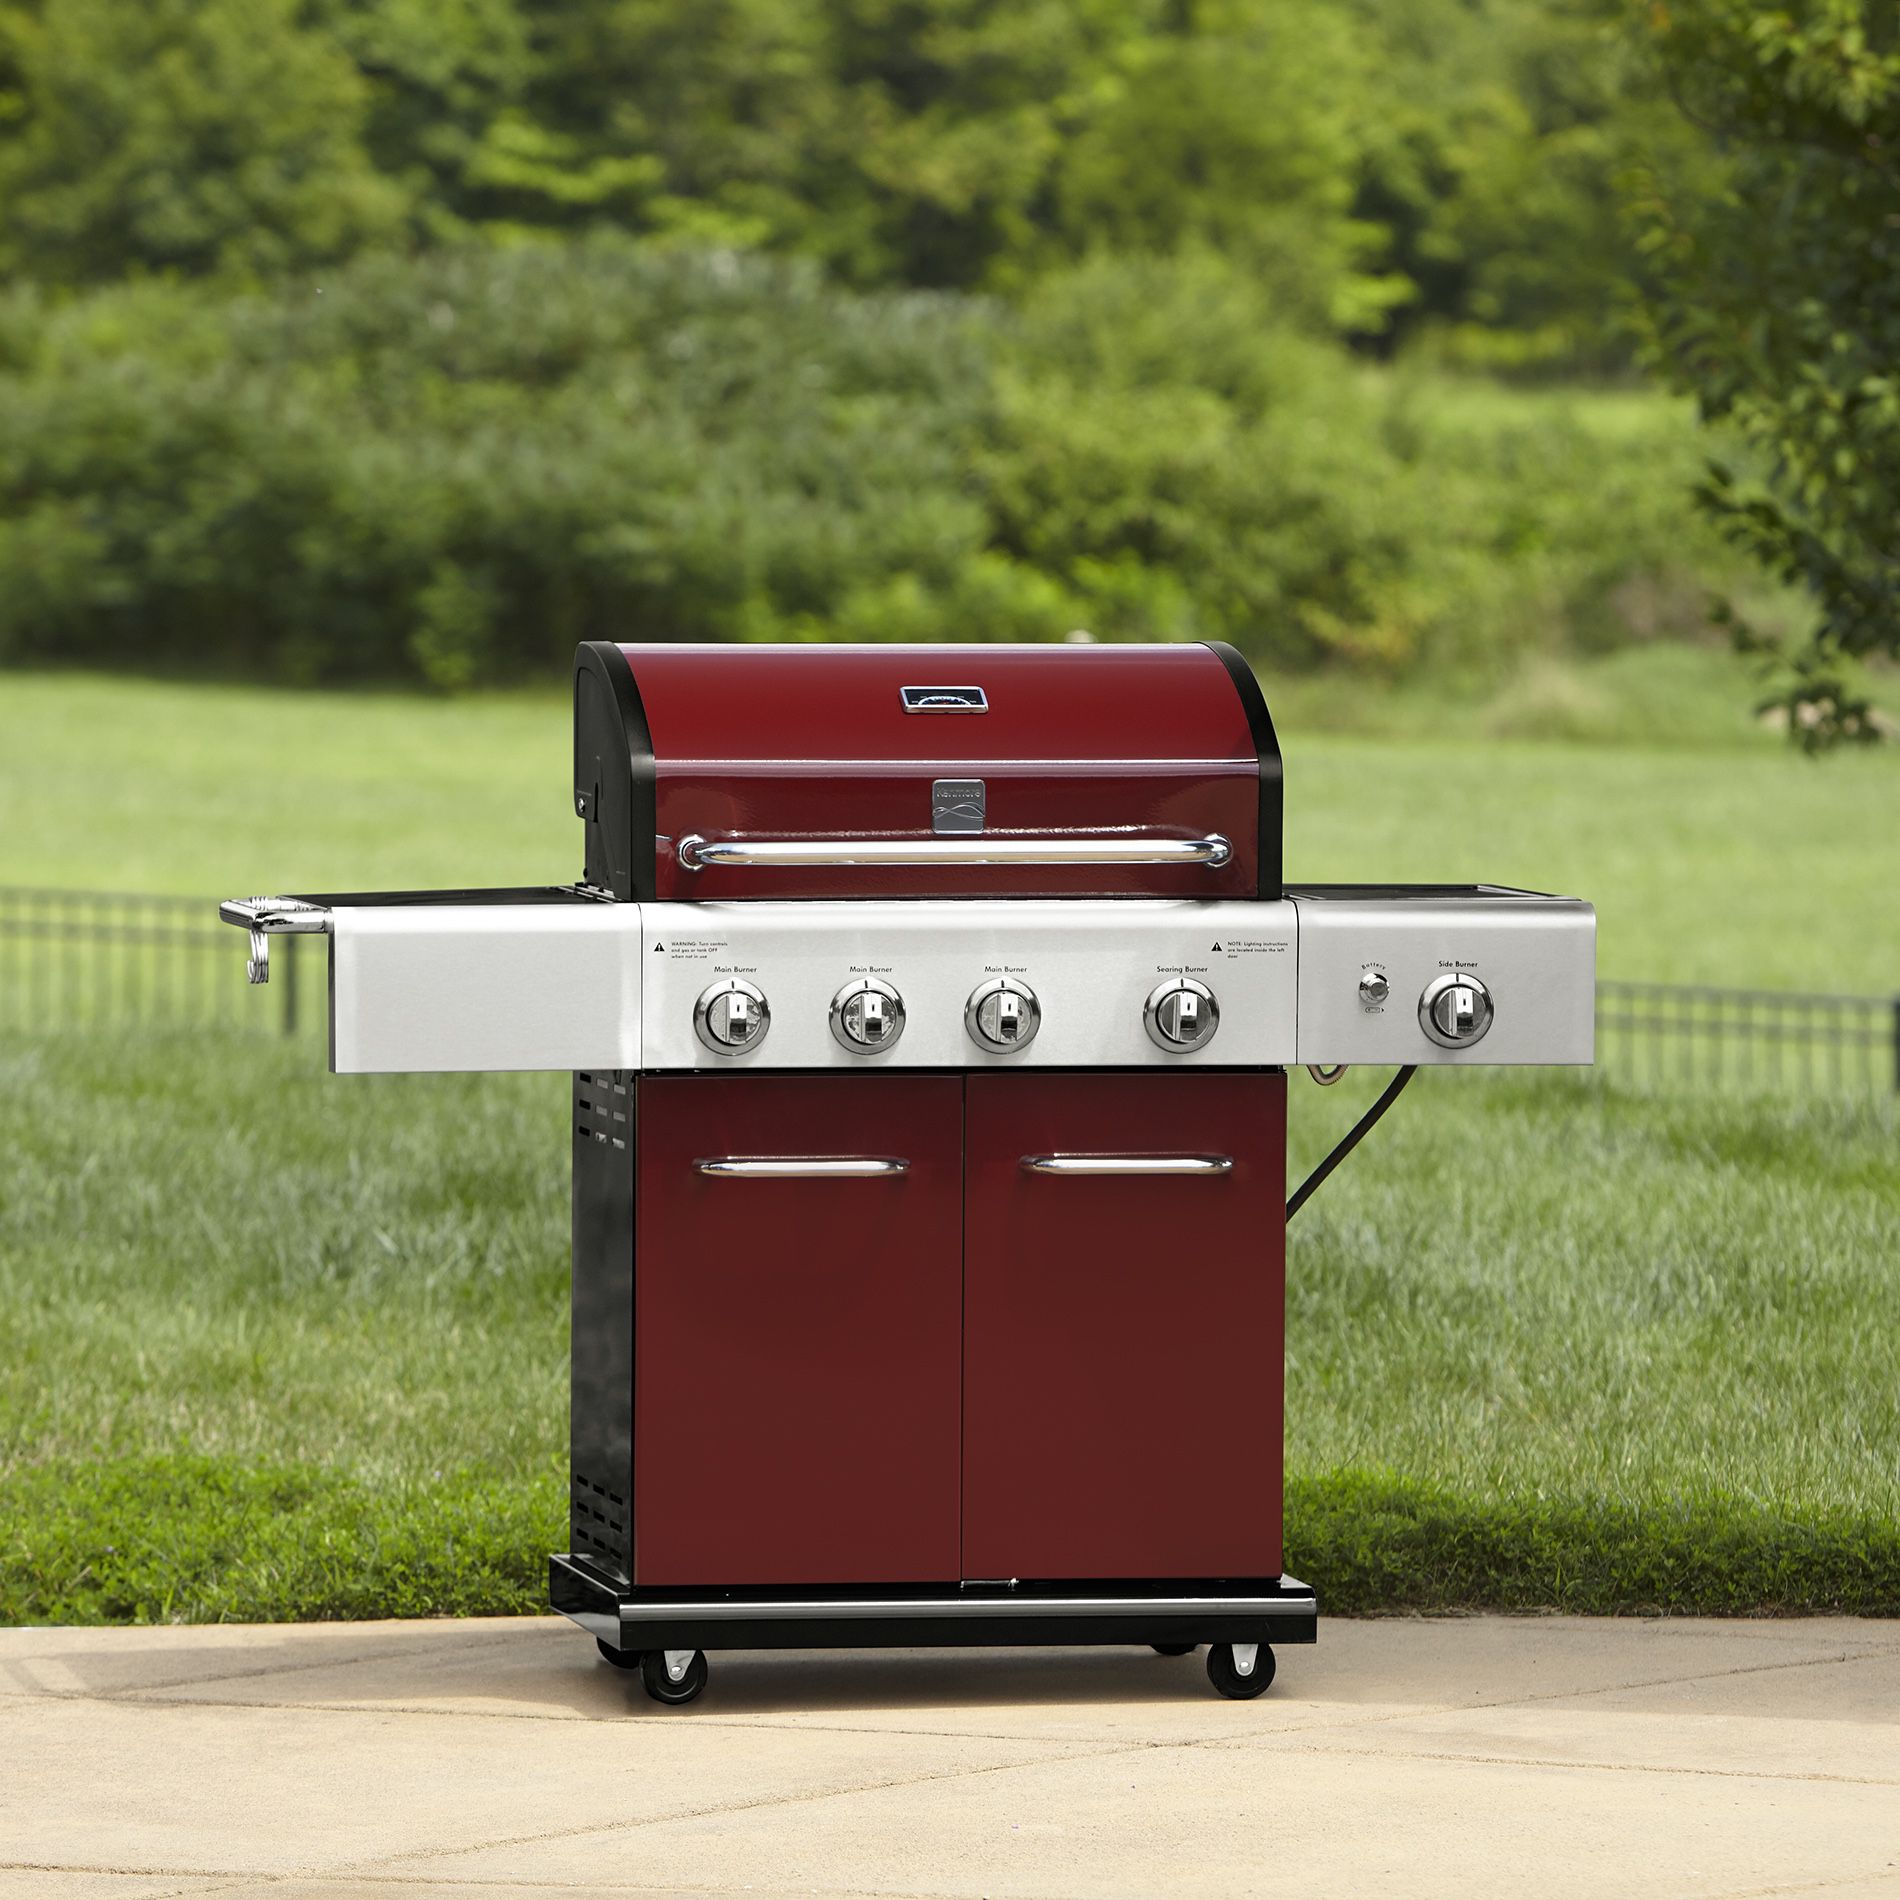 Kenmore 4 burner gas grill with searing side burner